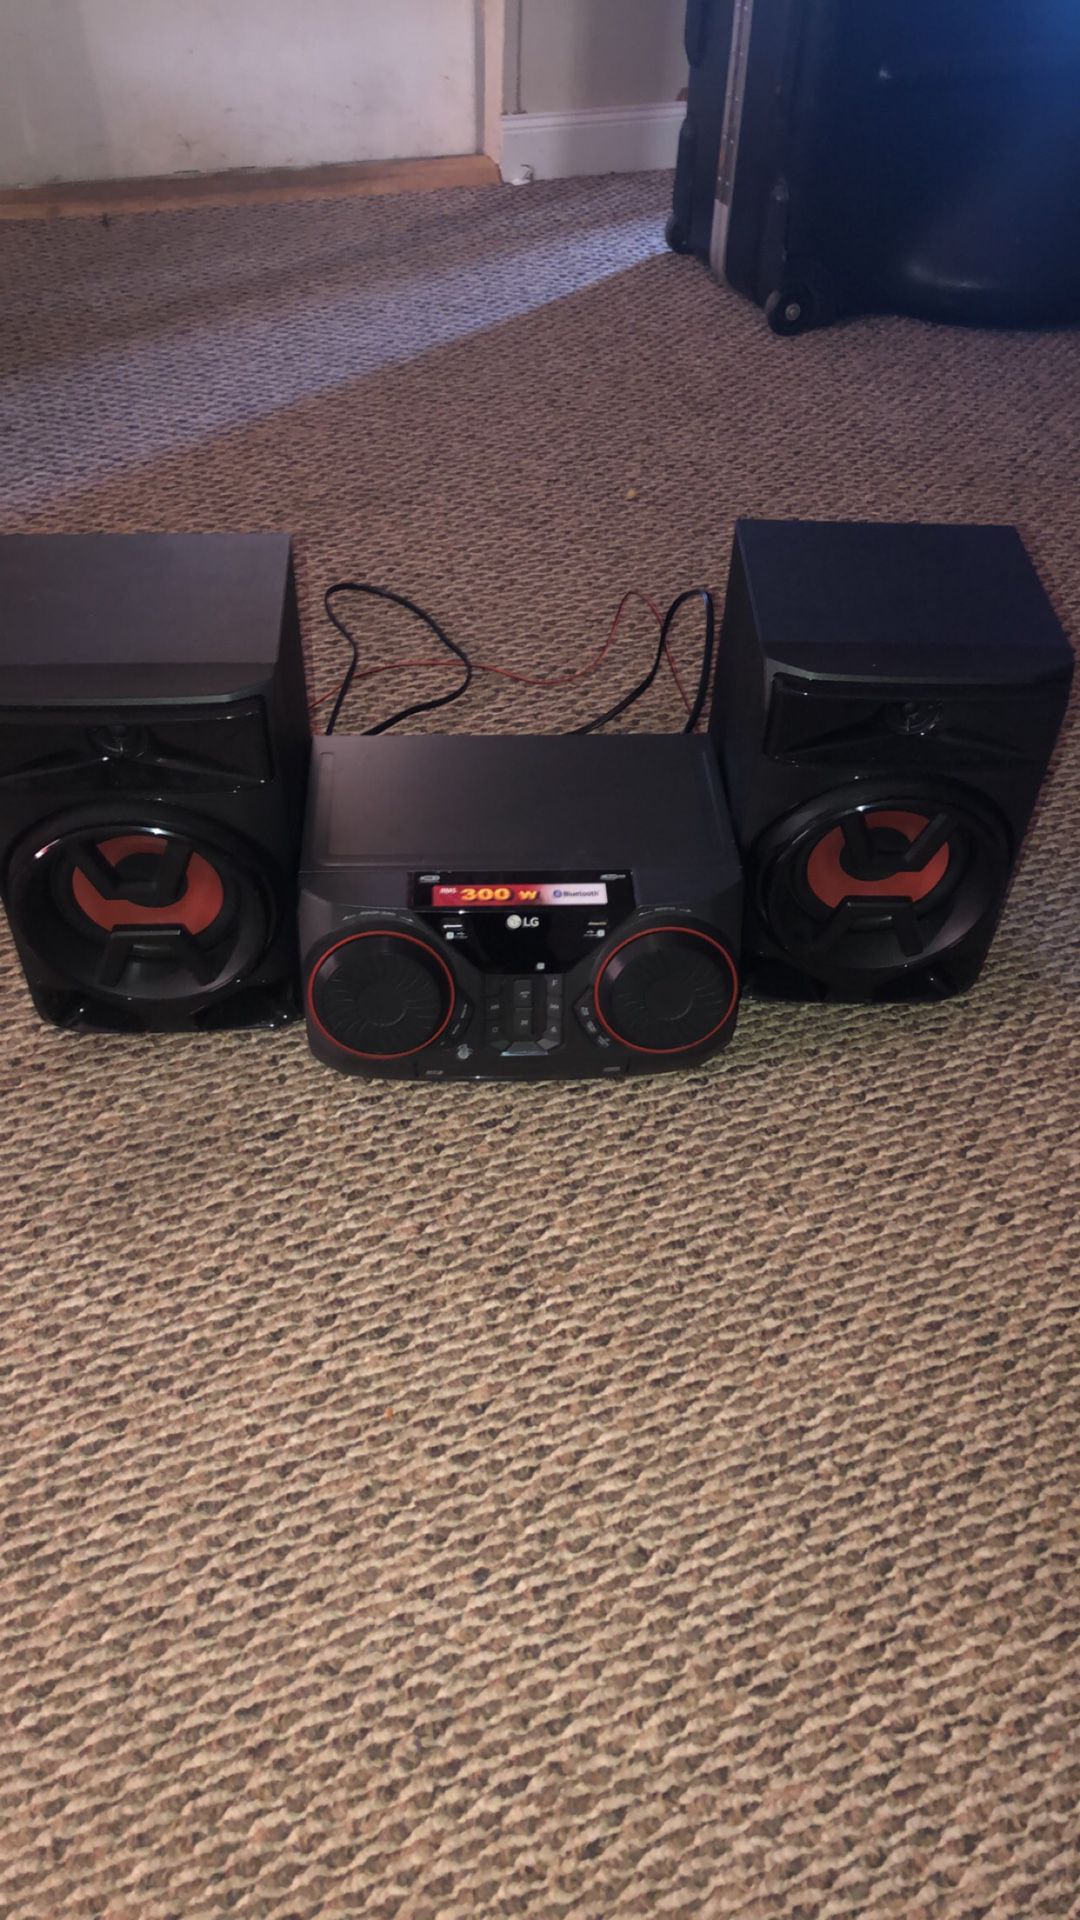 LG 300w stereo system with Bluetooth